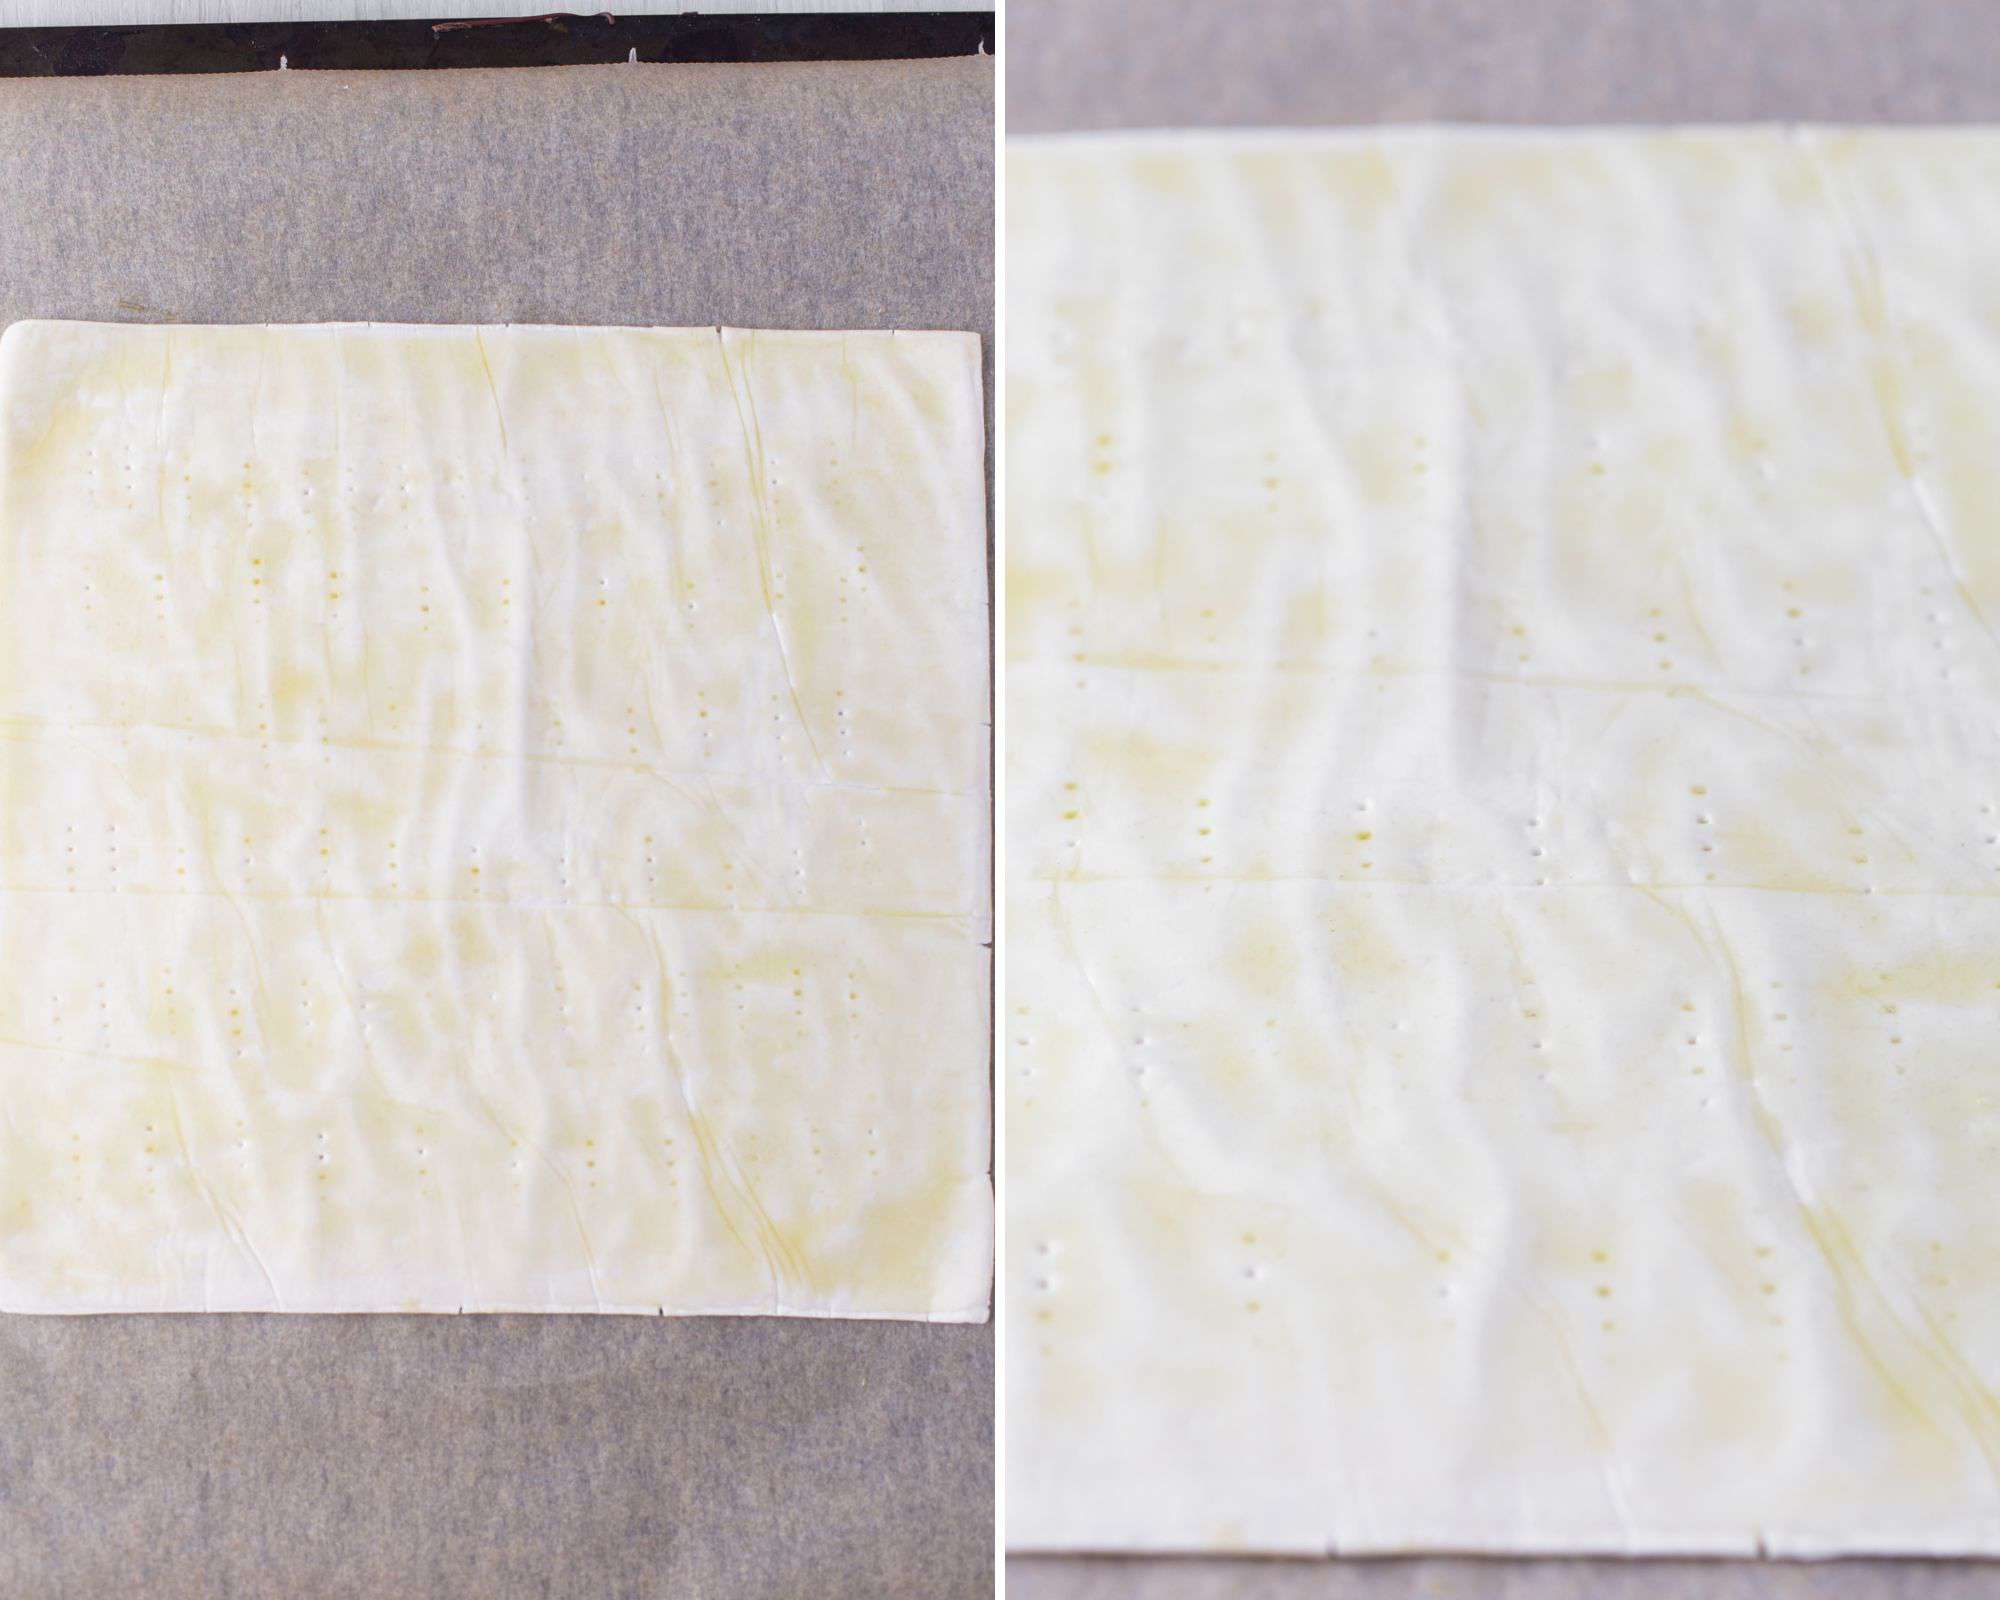 Puff pastry sheet on lined baking sheet brushed with olive oil.